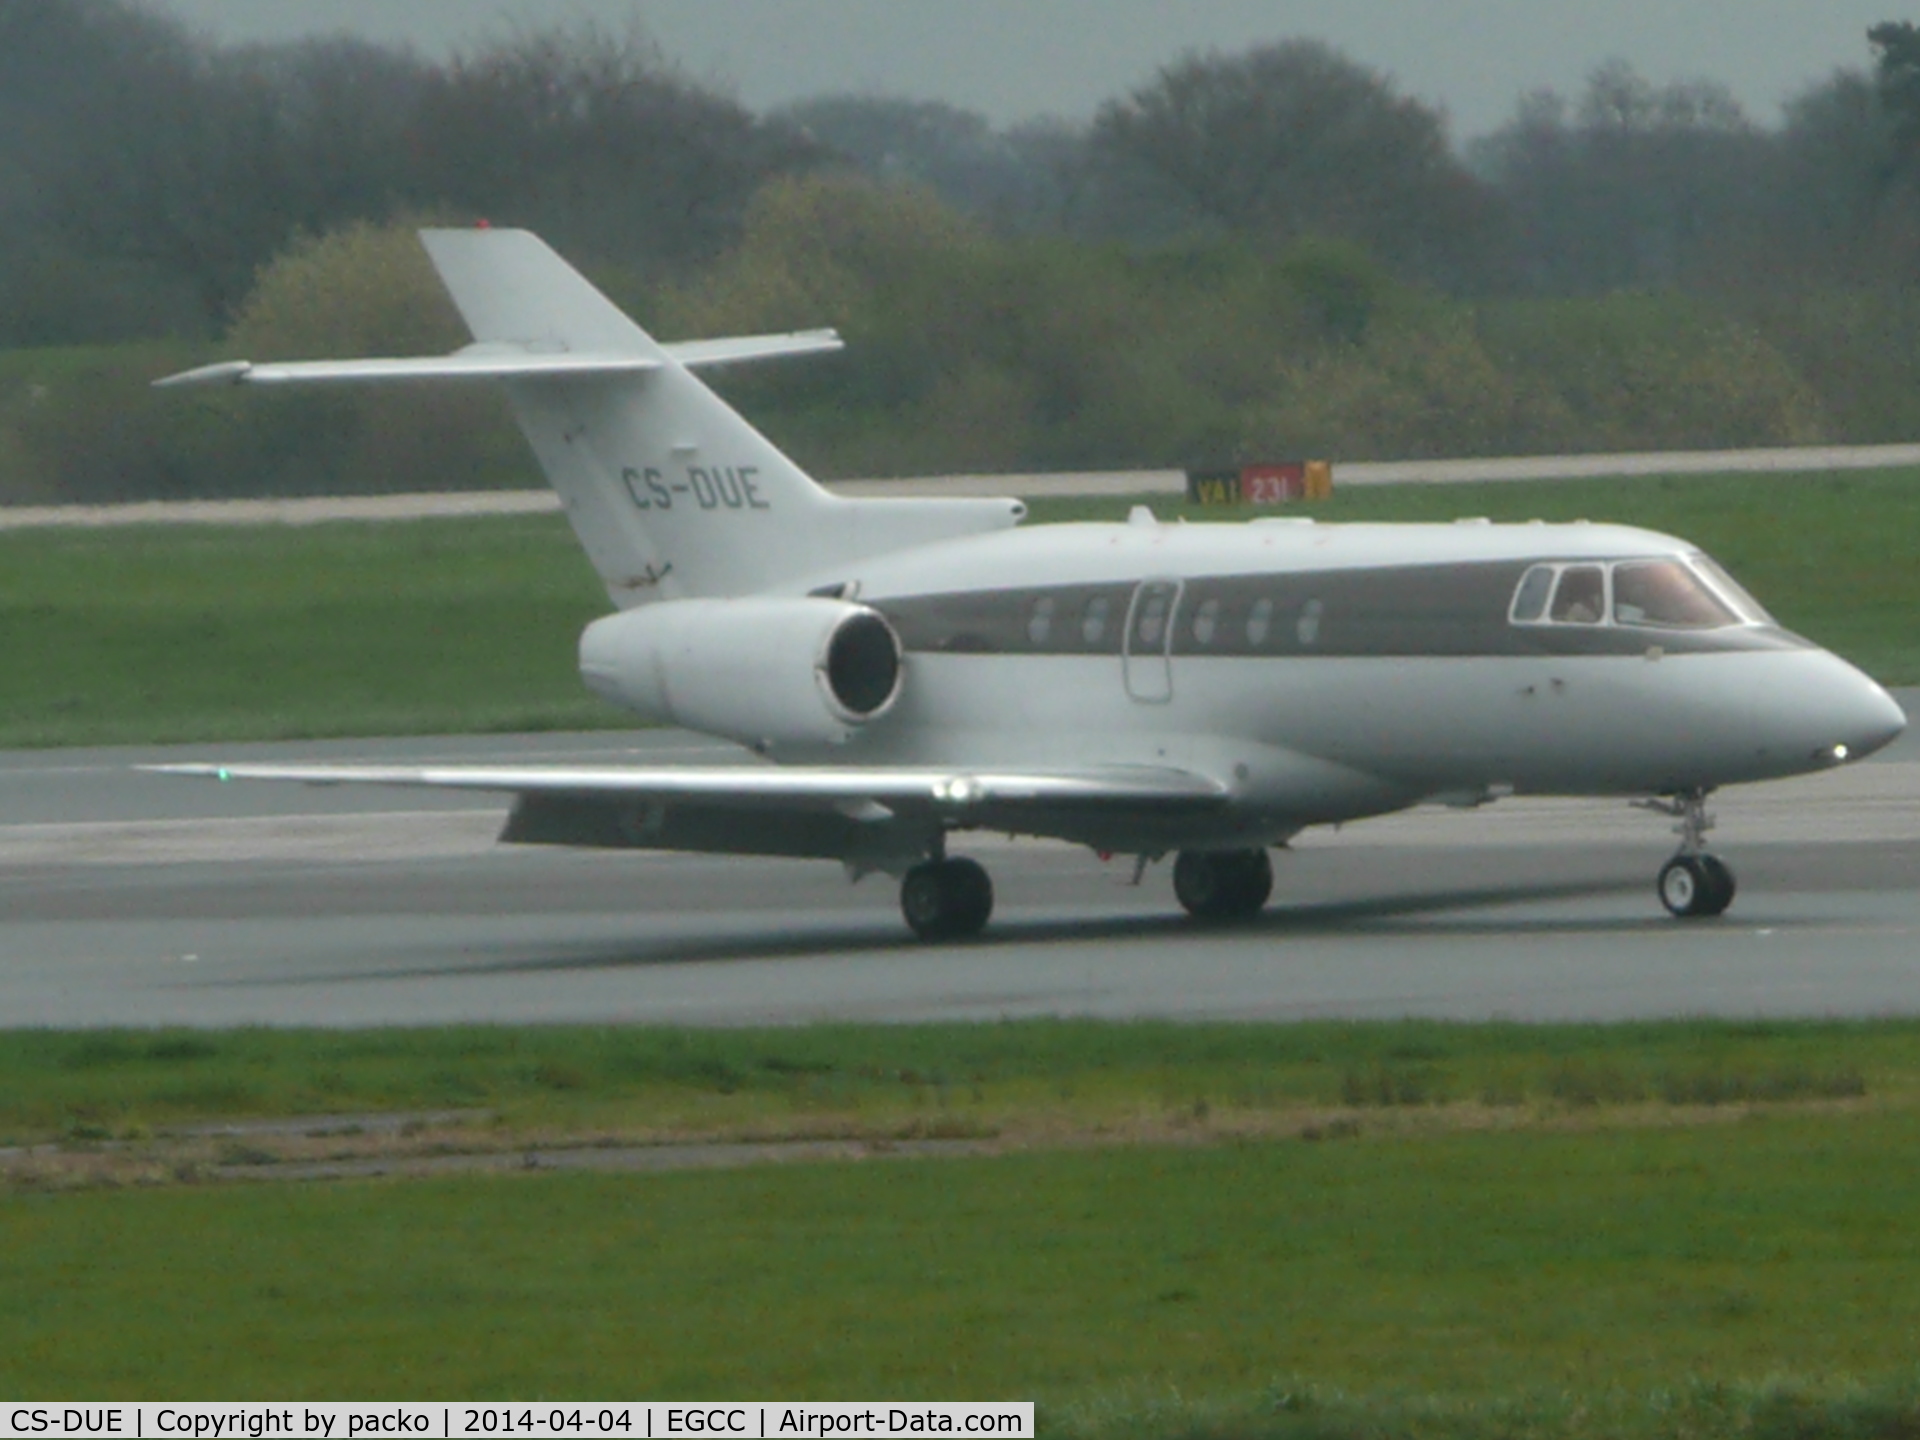 CS-DUE, 2008 Hawker Beechcraft 750 C/N HB-11, just landed on 23R to go onto the OCS-RAMP